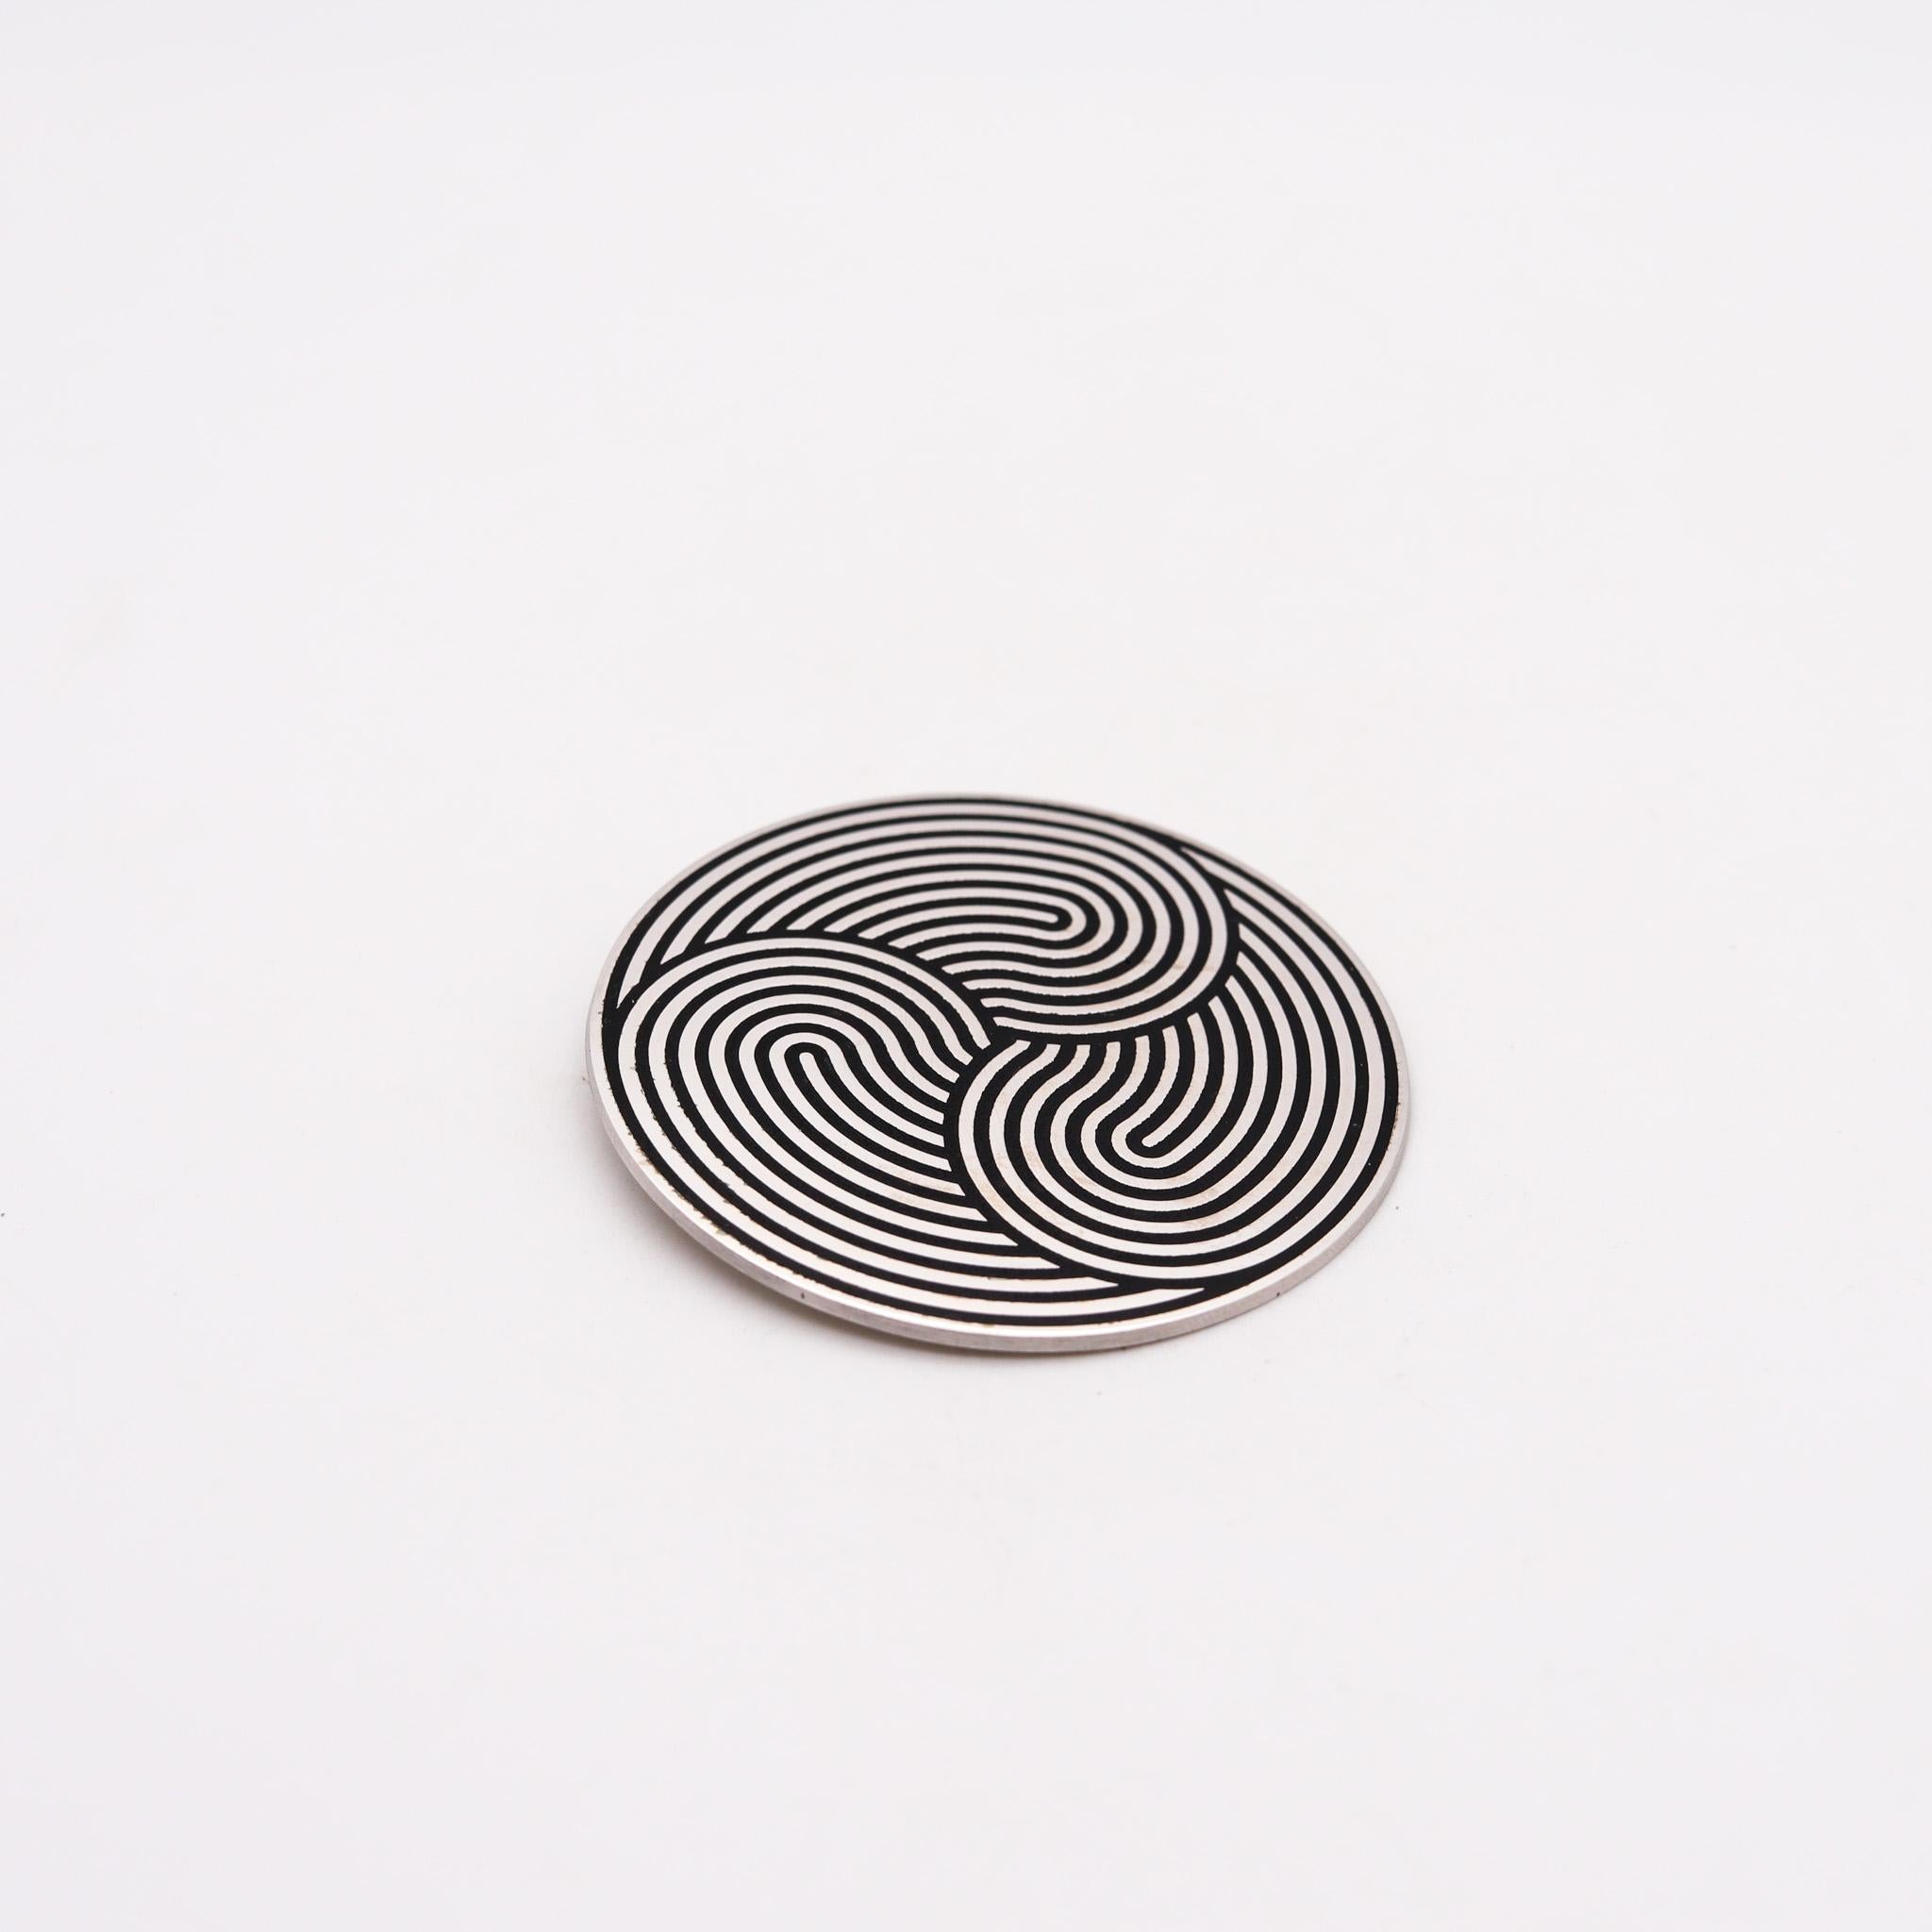 Op-Art brooch pendant designed by Marina Apollonio (1940-).

An extremely rare piece of op-art, created in Paris France by the artist Marina Apollonio, back in the 1966. It was made in a closed edition of only 12 pieces and crafted in solid